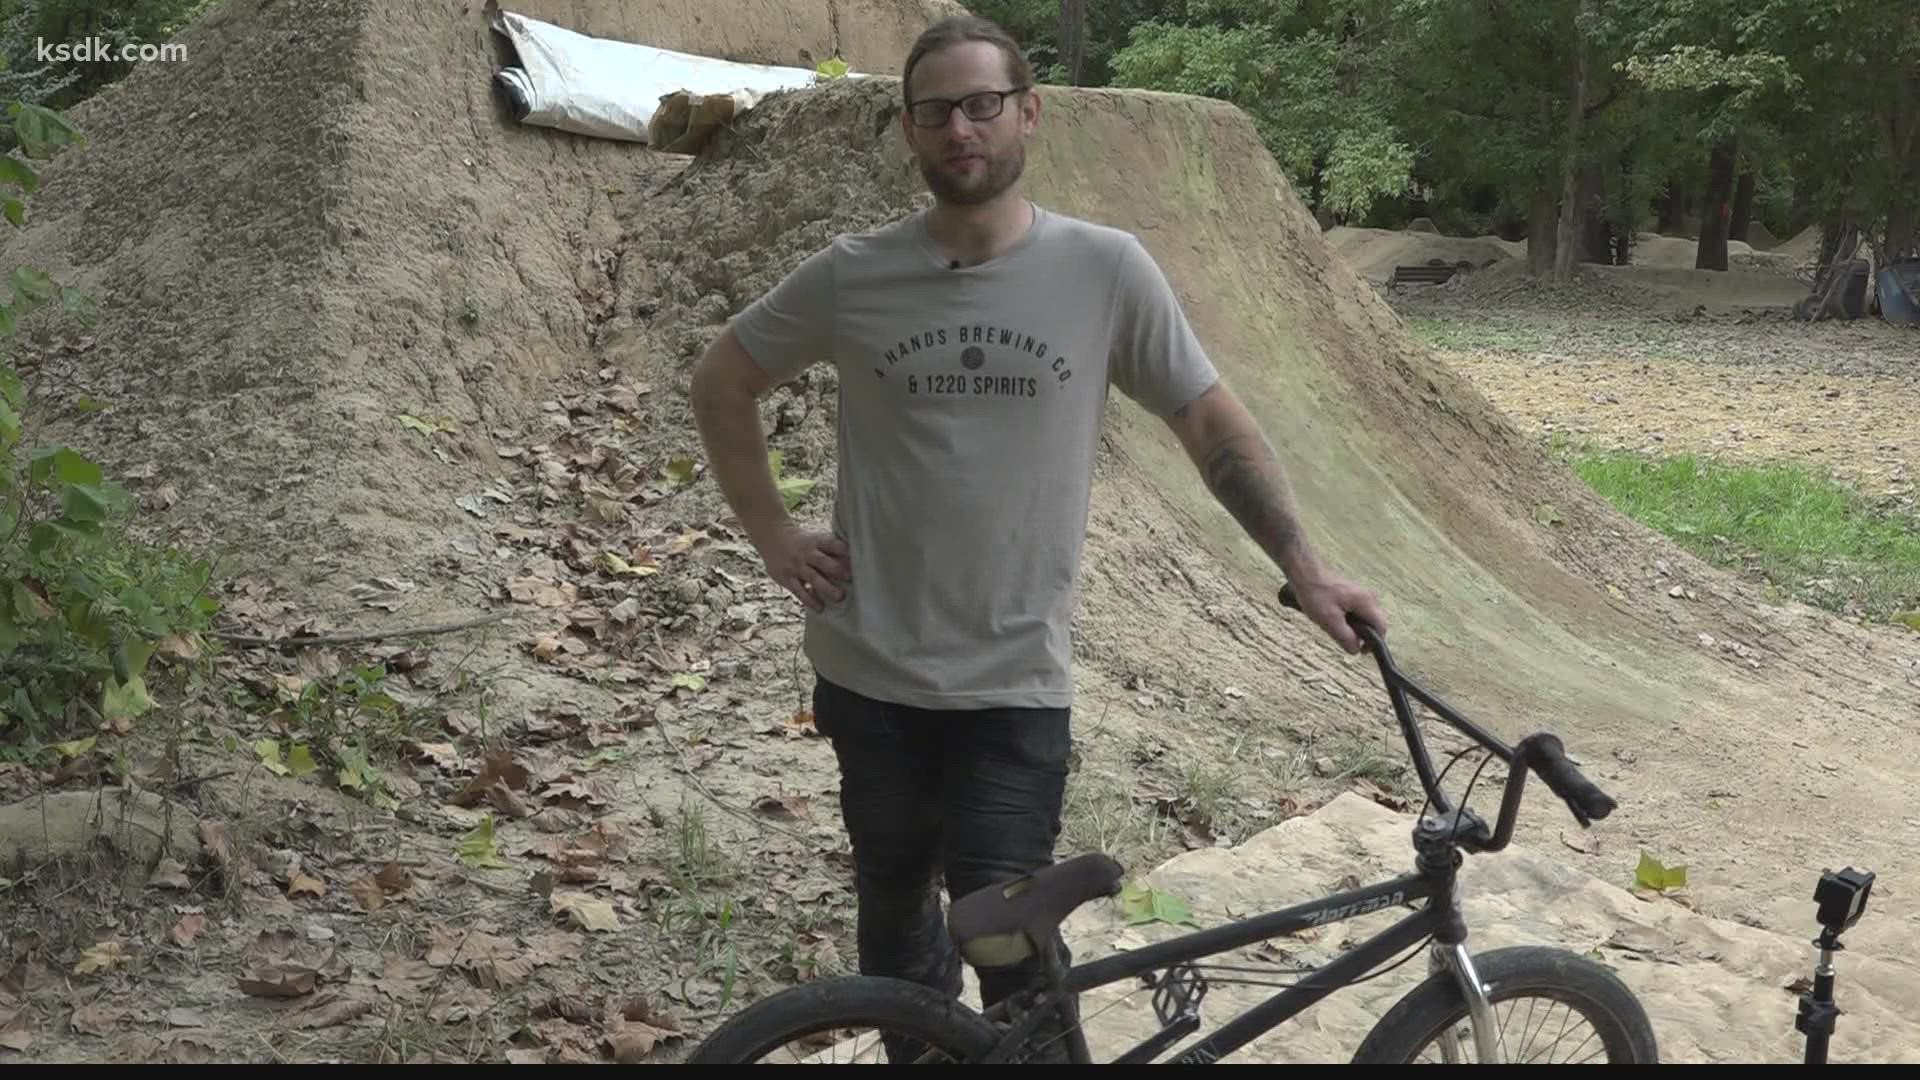 The St. Louis Bike Park is a special place for professional BMX rider Jack Warden.